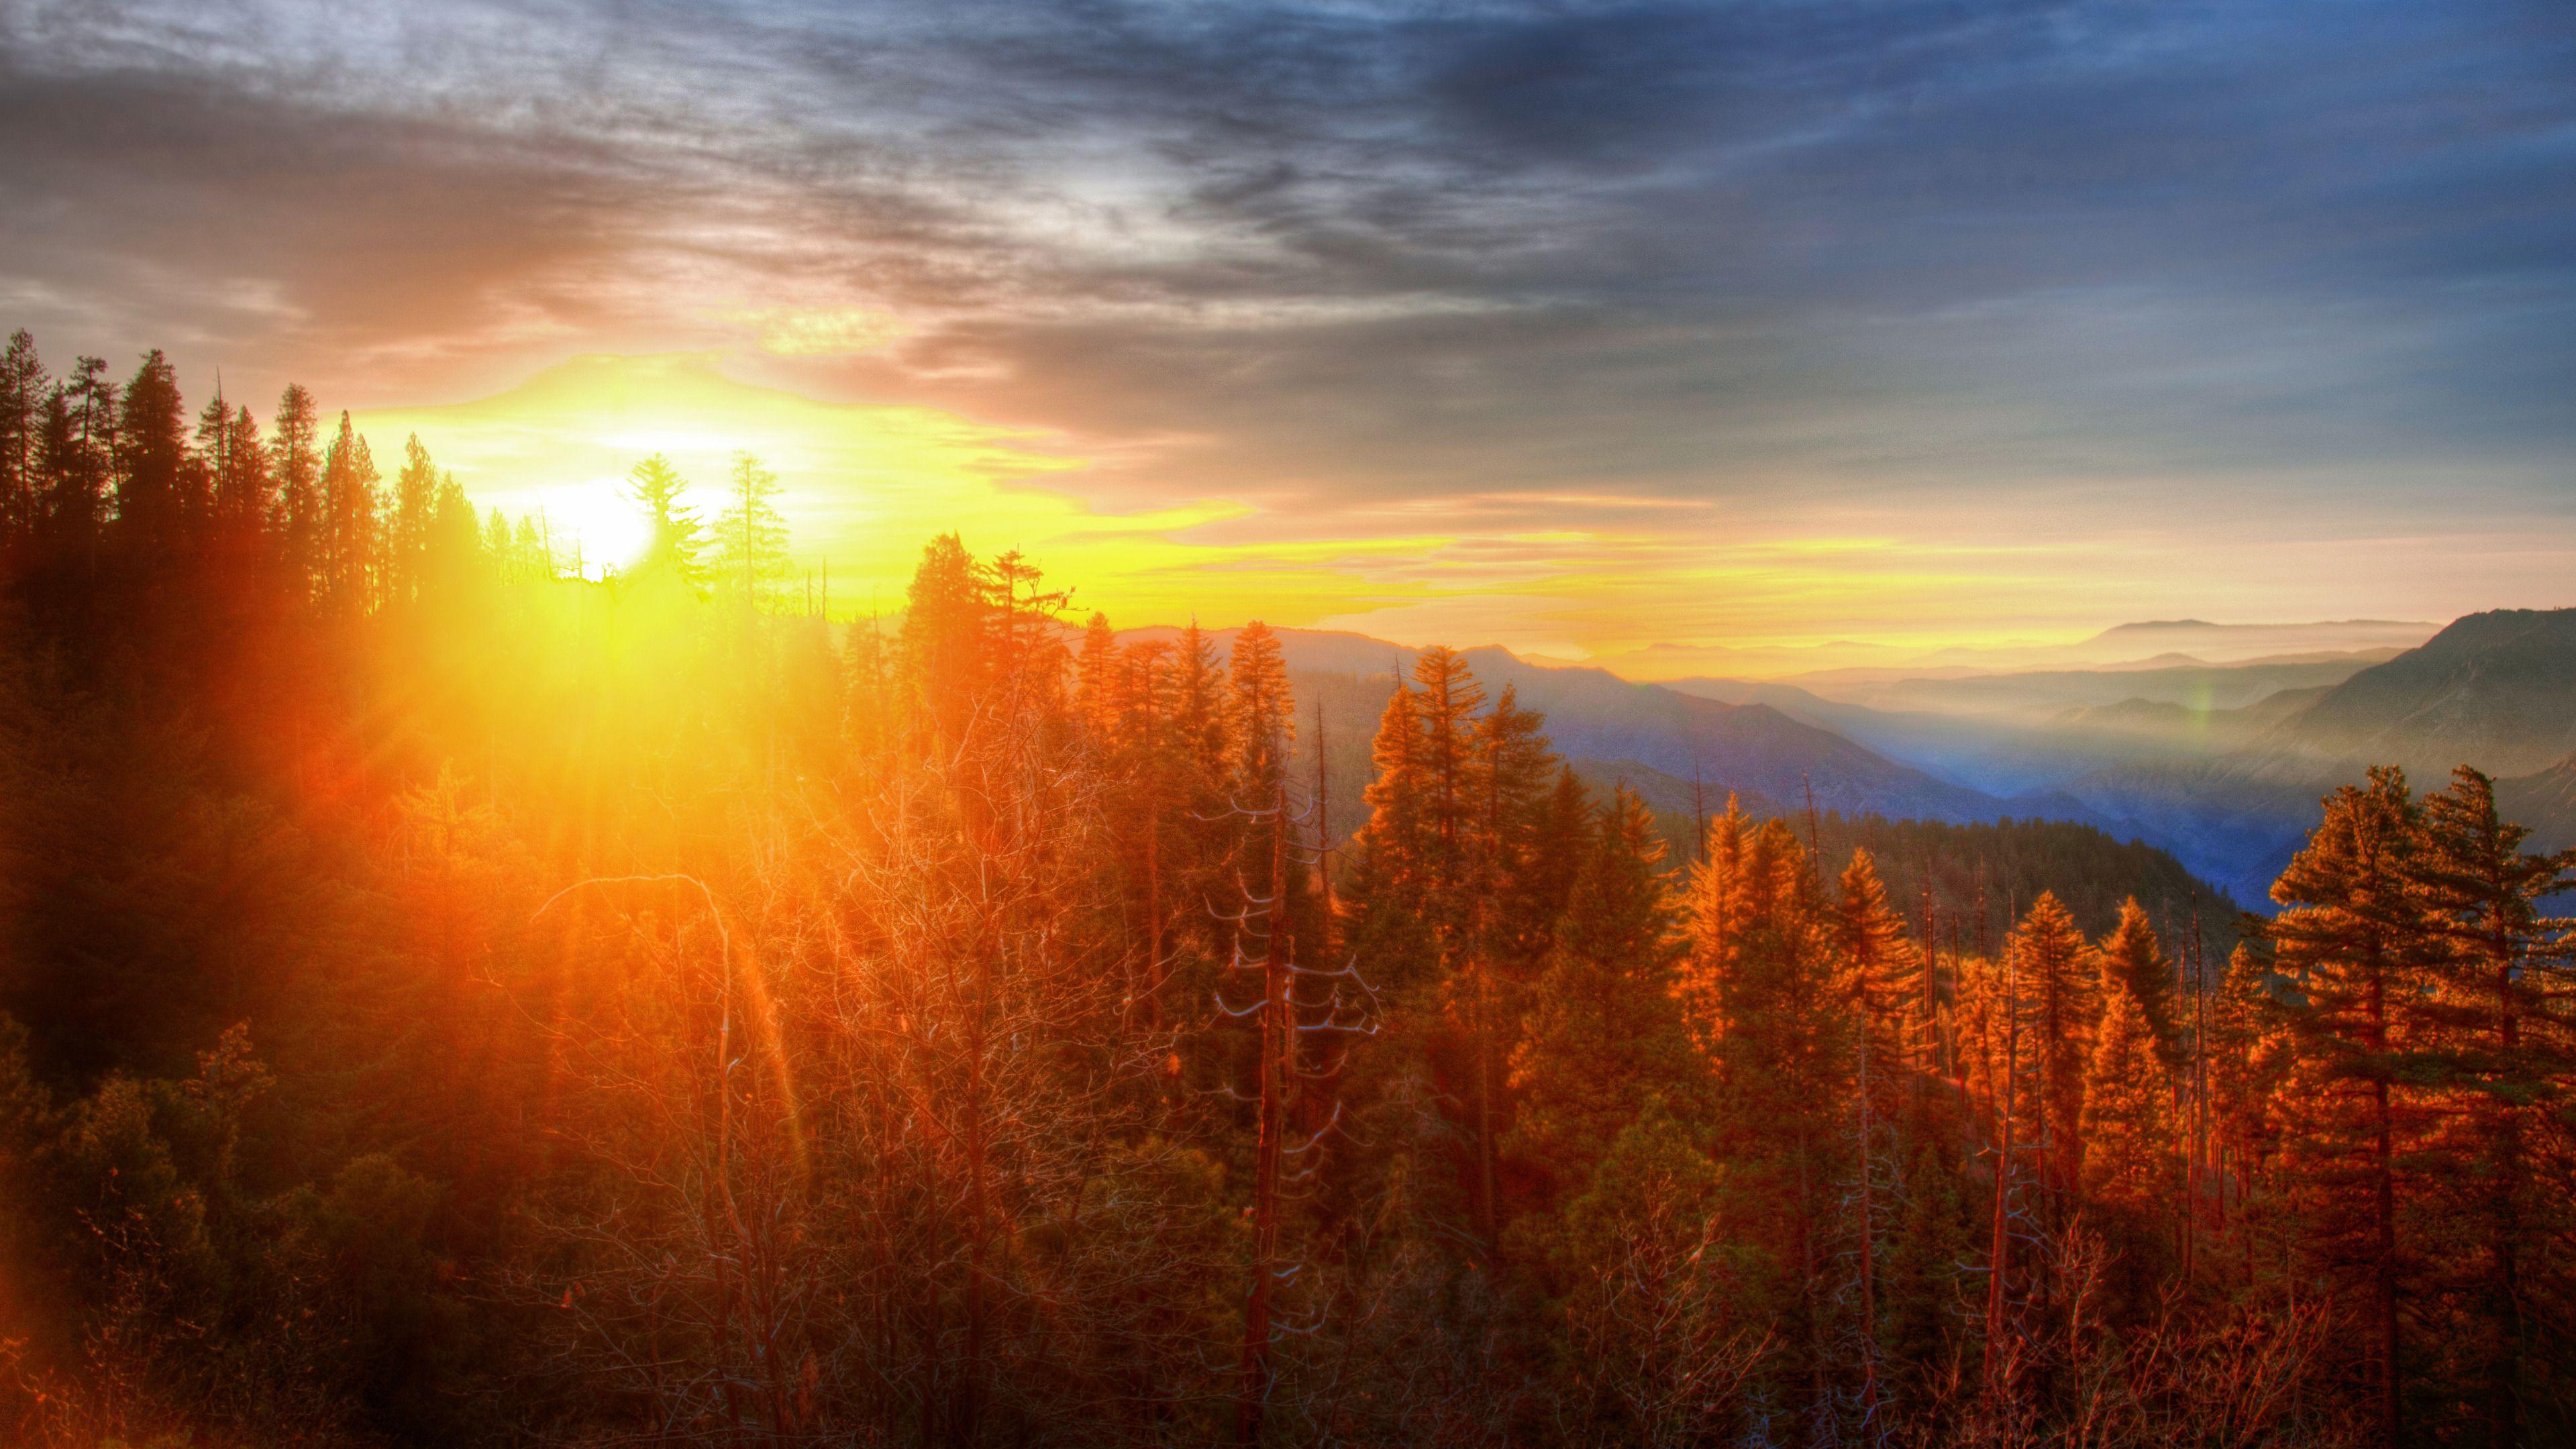 Forest Sunset Wallpapers - Top Free Forest Sunset Backgrounds